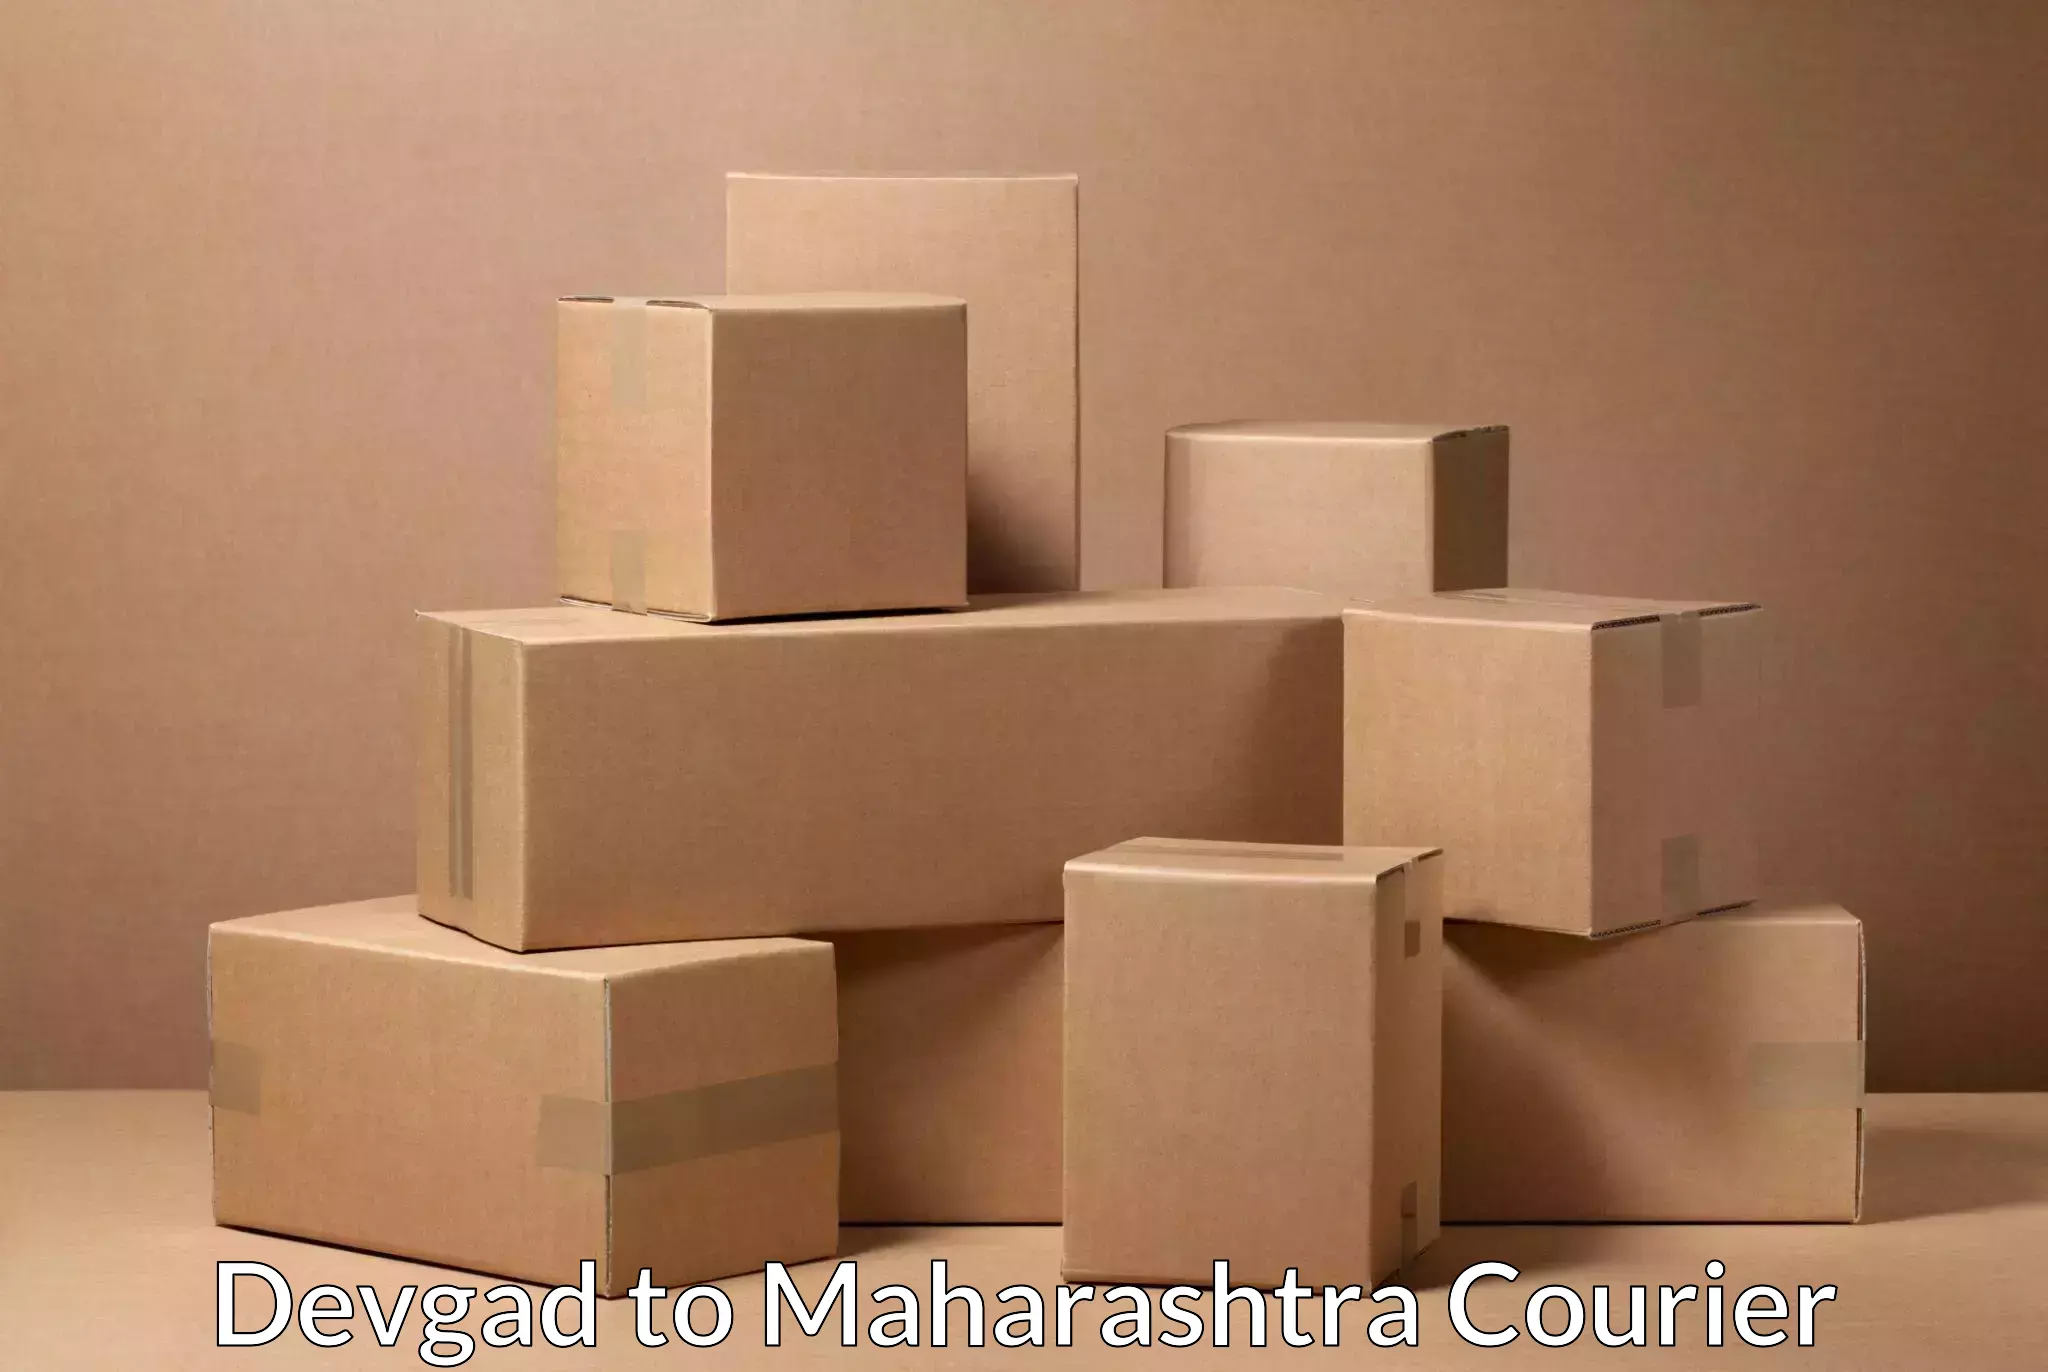 Cargo delivery service in Devgad to Bhusawal